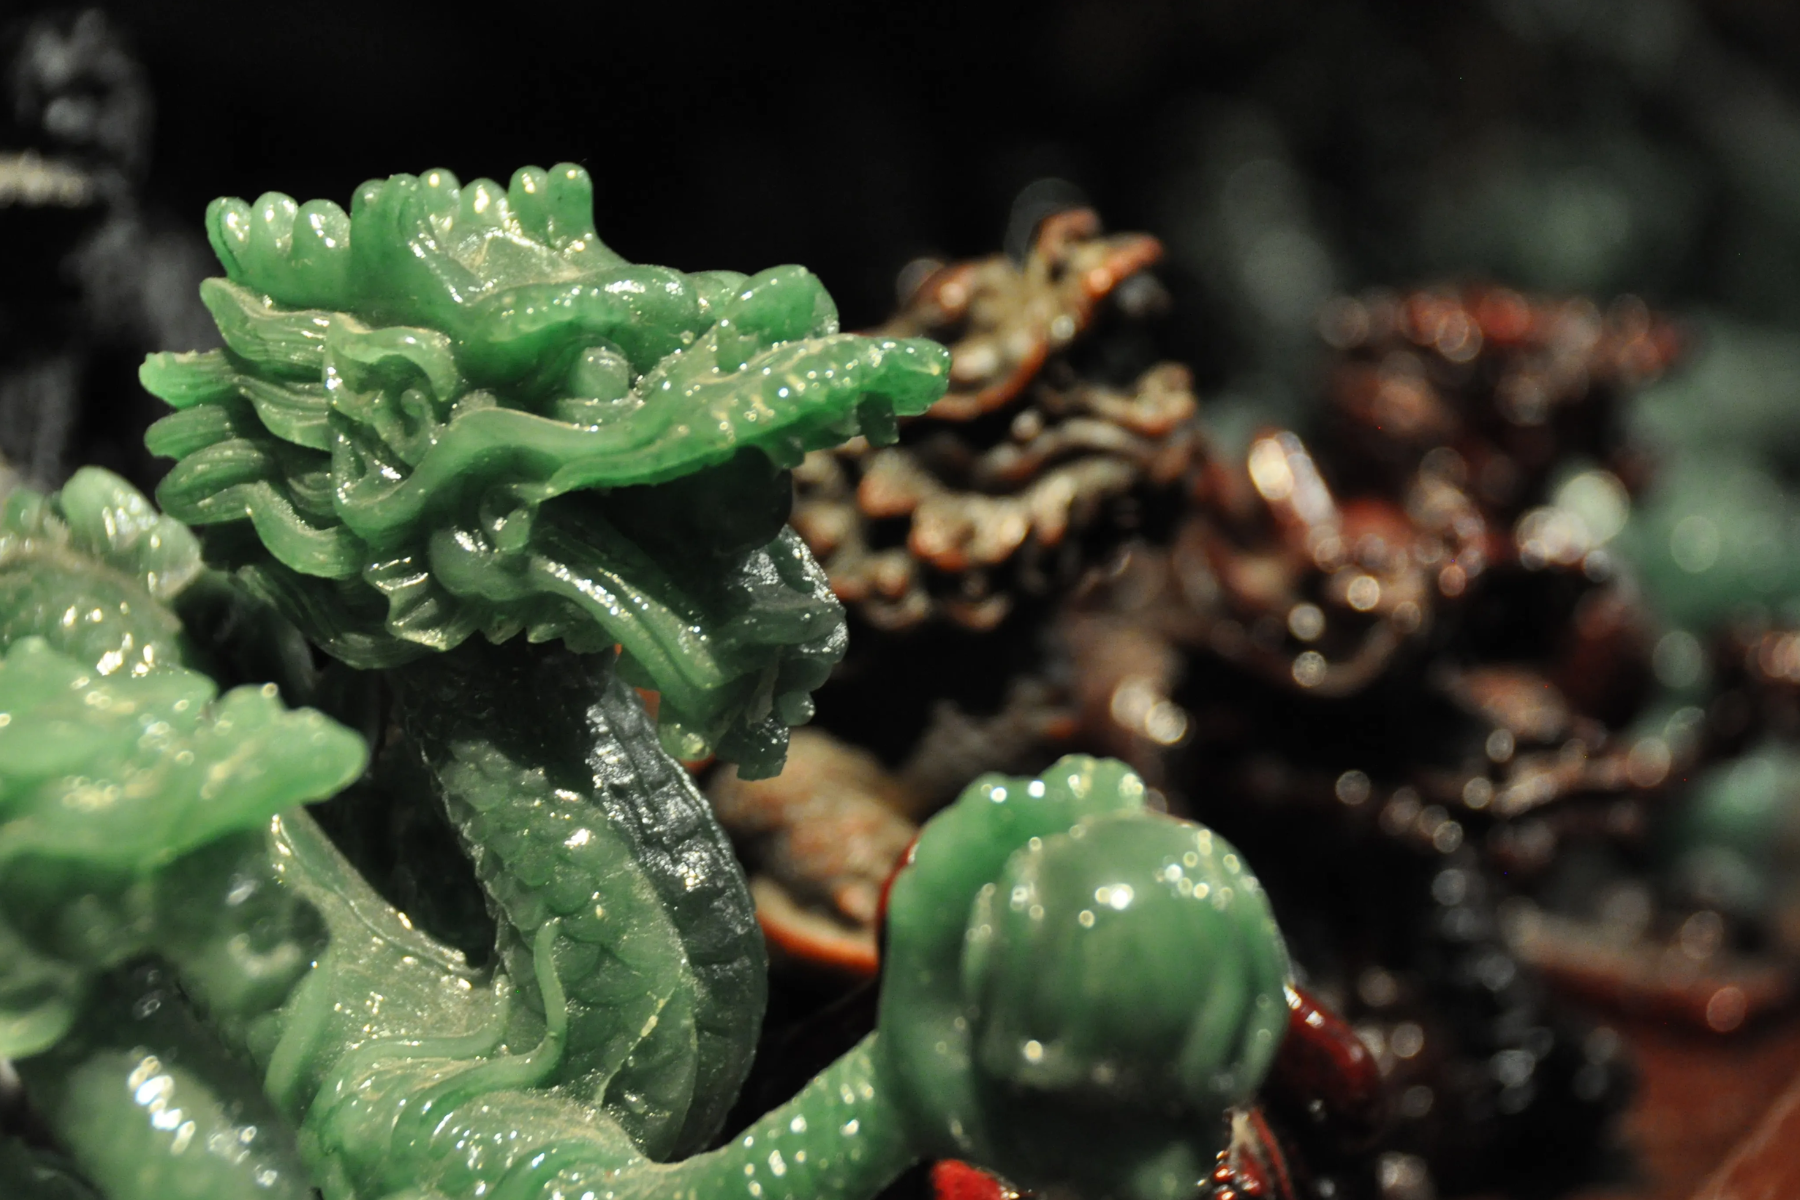 A jade dragon sculpture was created in China